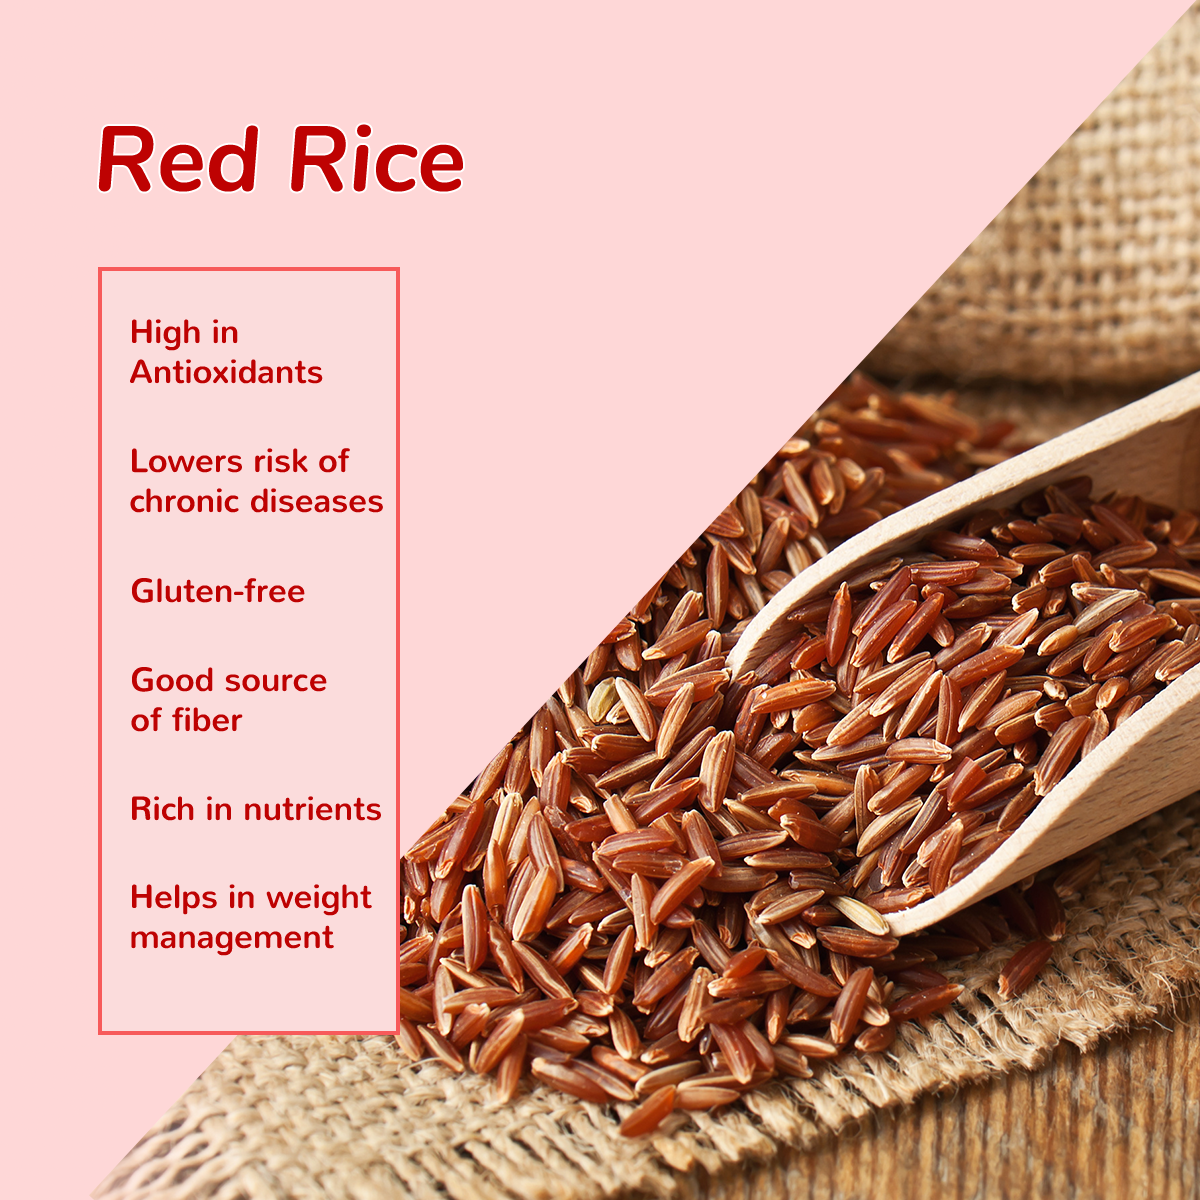 Saaral Unpolished Red Rice 500 GMS